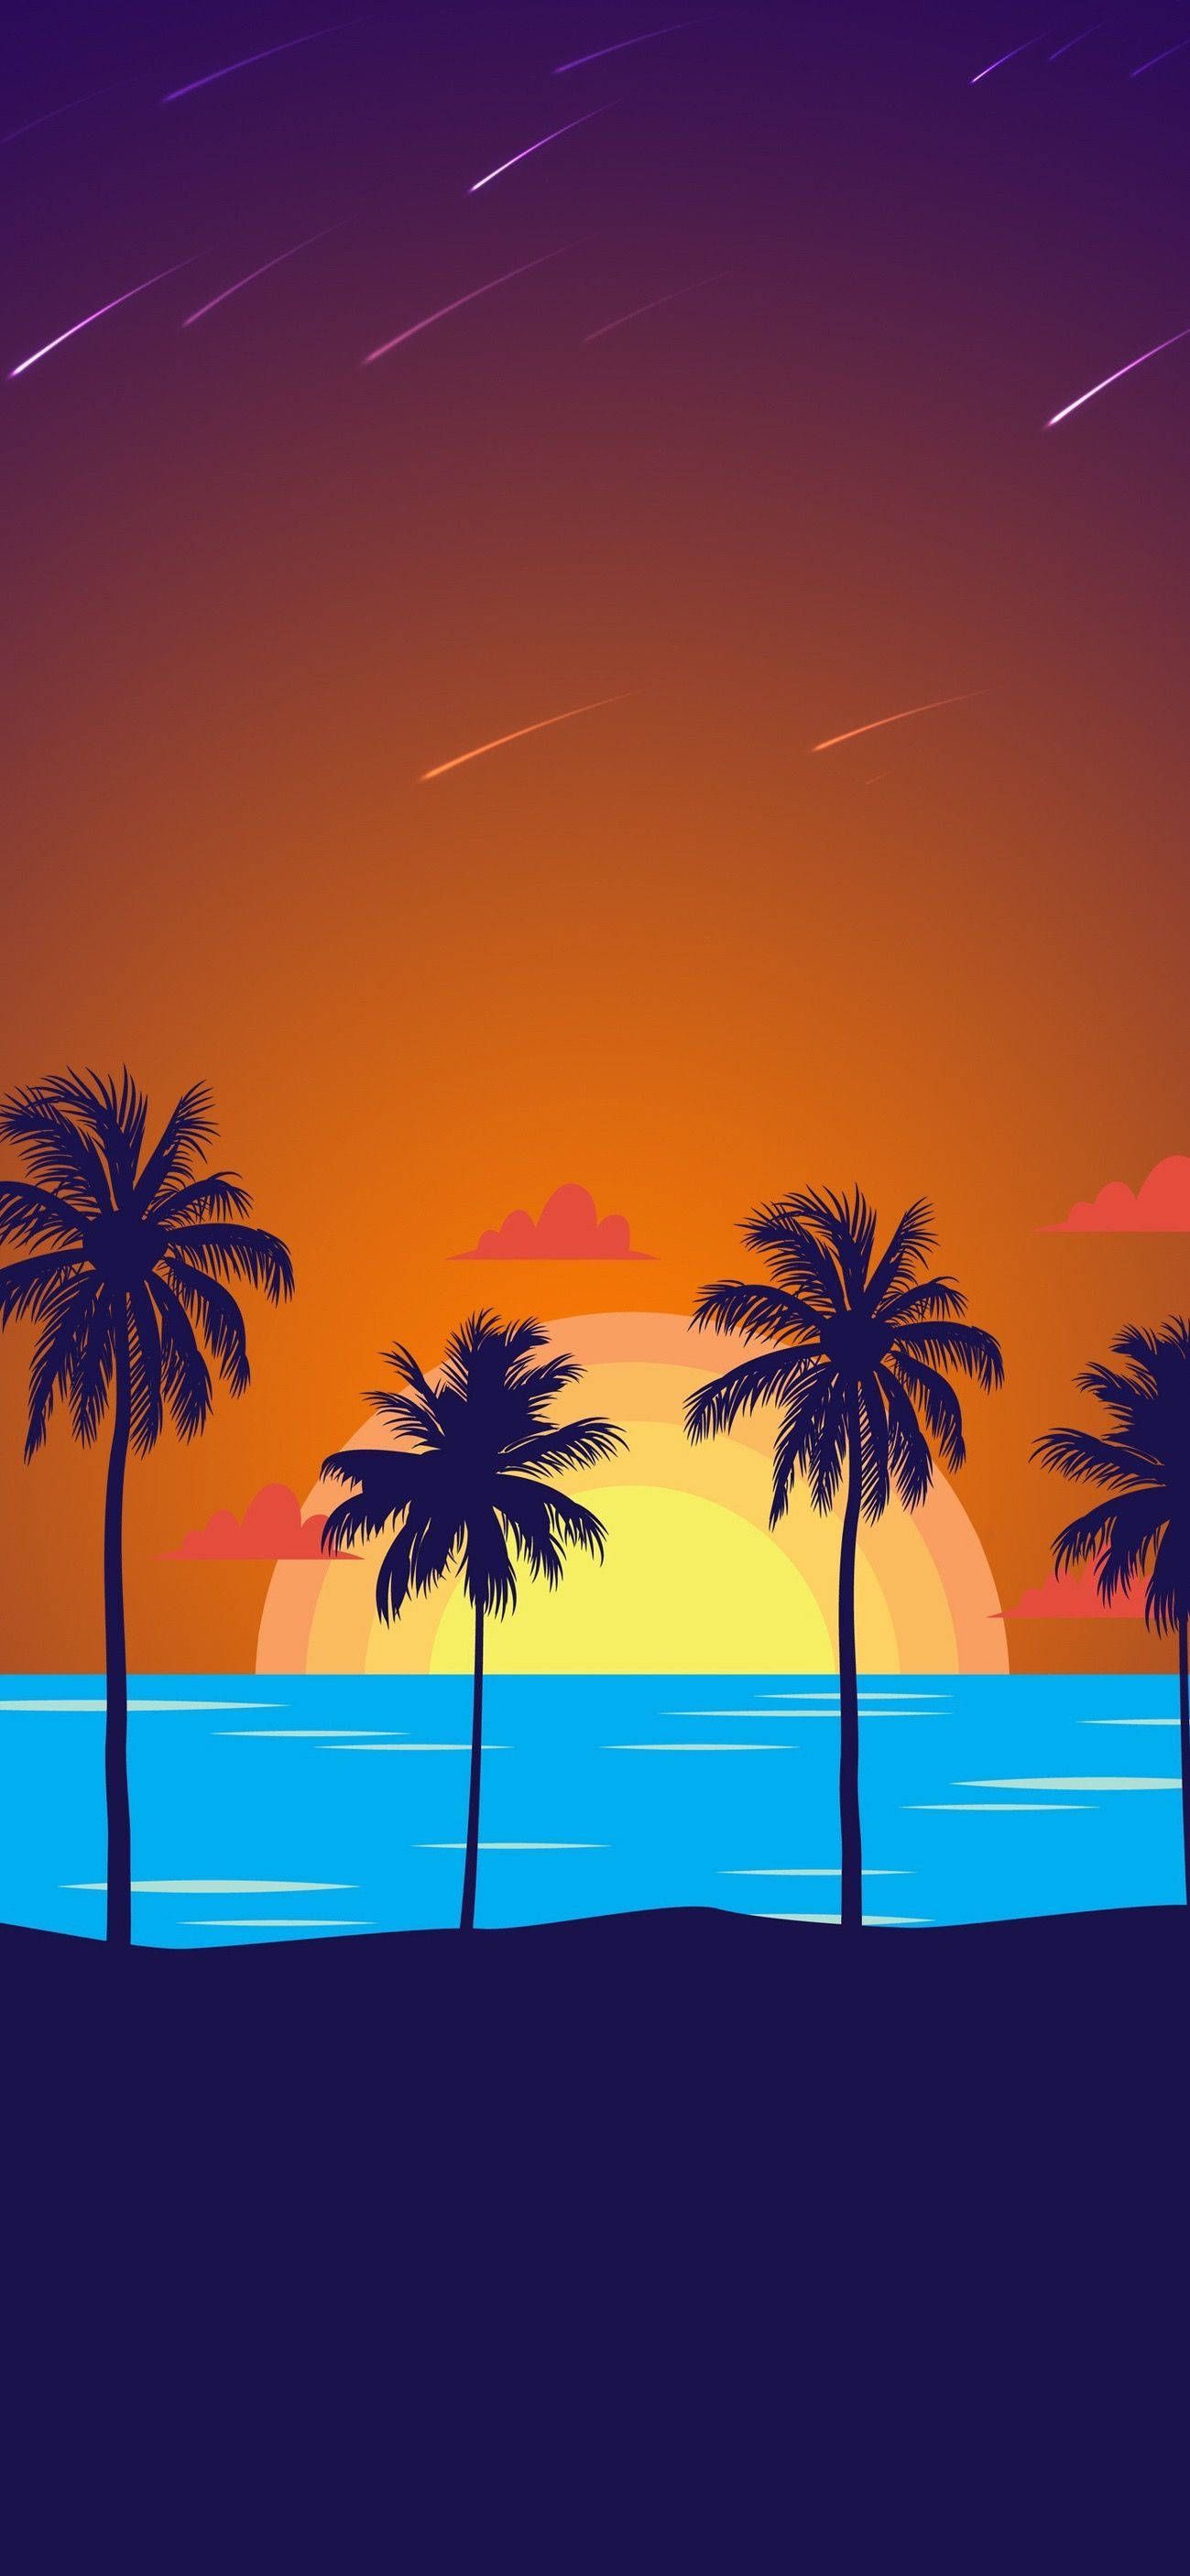 Download Tropical Island Aesthetic iPhone 11 Wallpaper